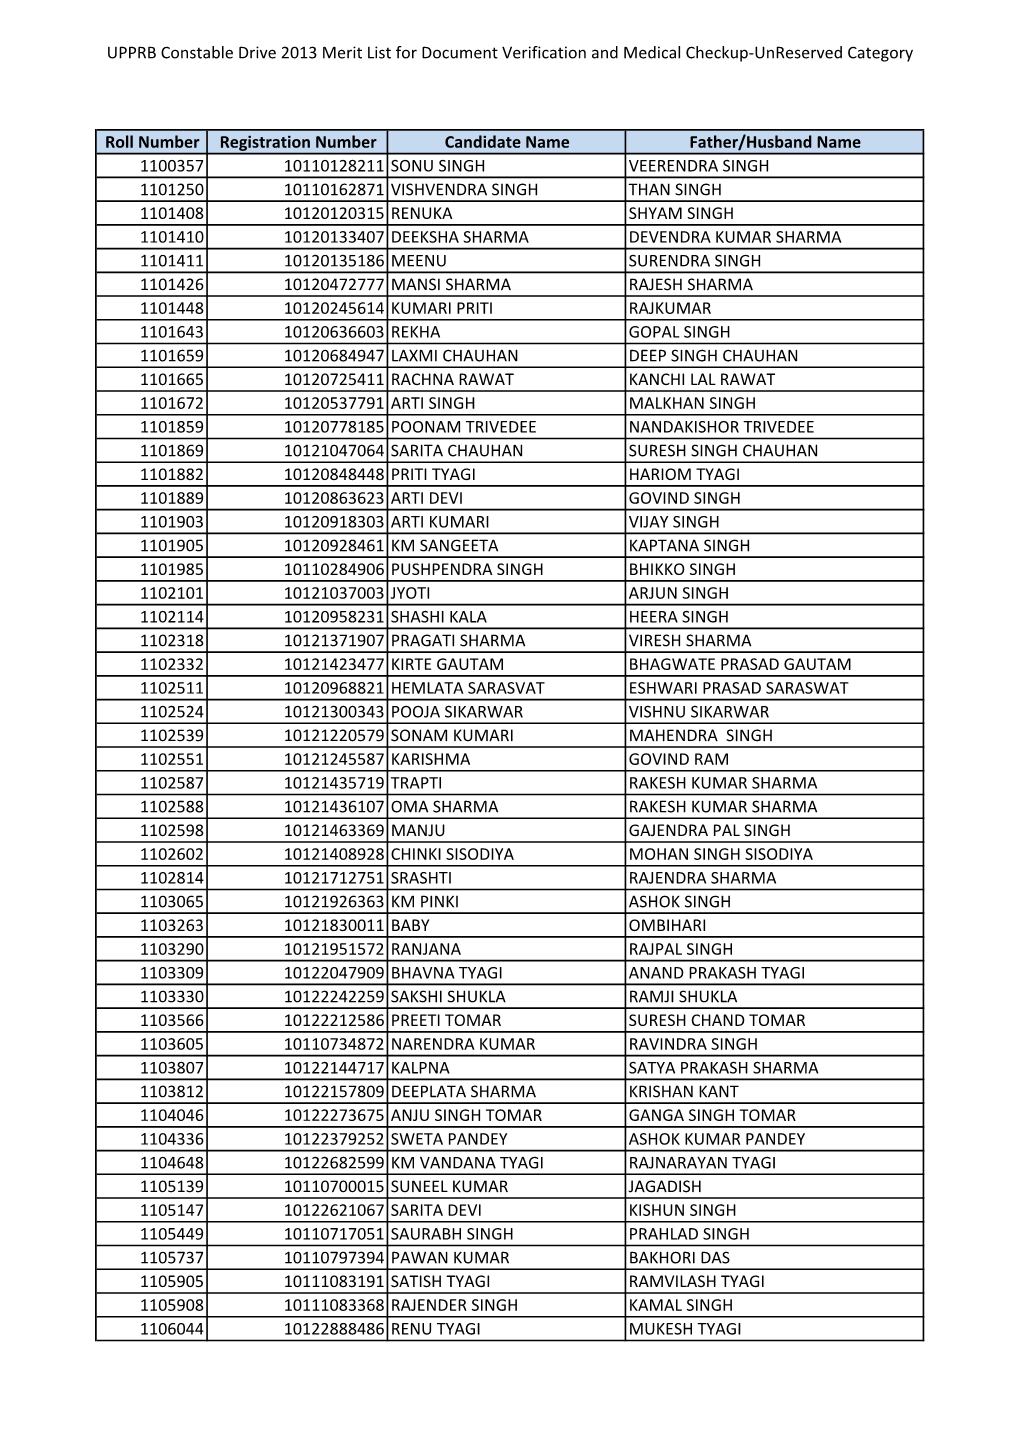 UPPRB Constable Drive 2013 Merit List for Document Verification and Medical Checkup-Unreserved Category